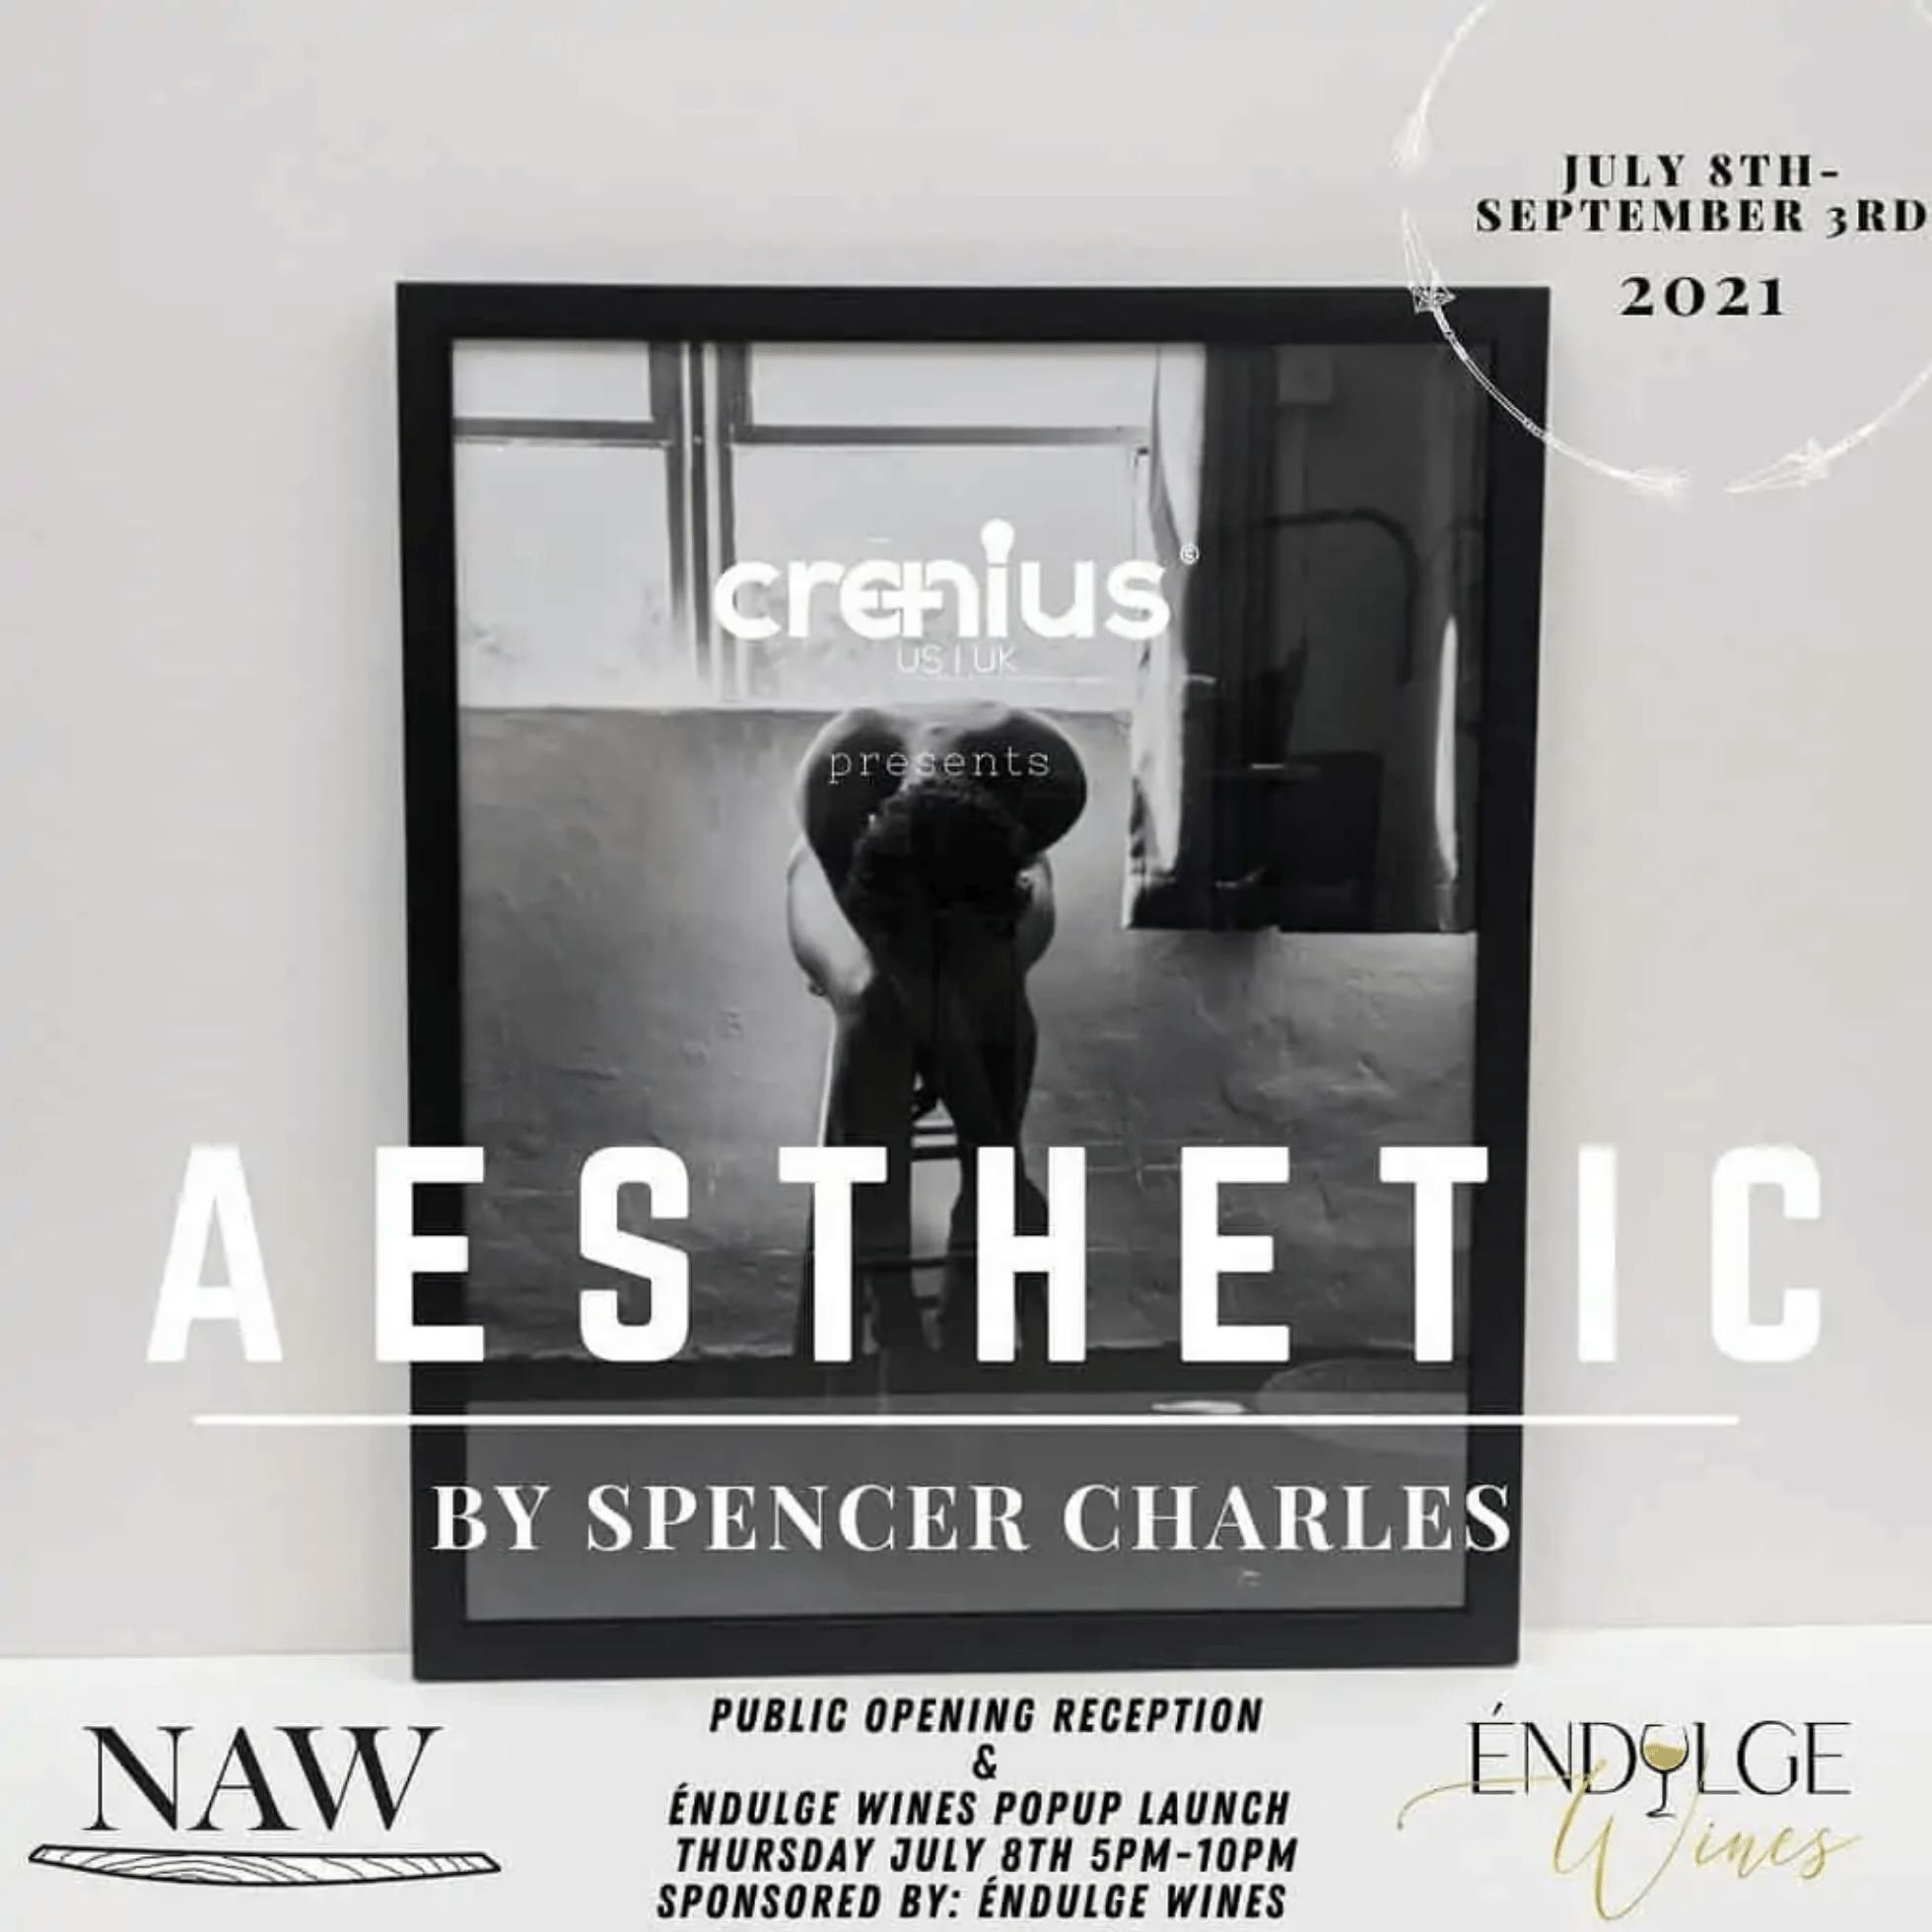 "Aesthetic" Exhibit at Well Art Gallery